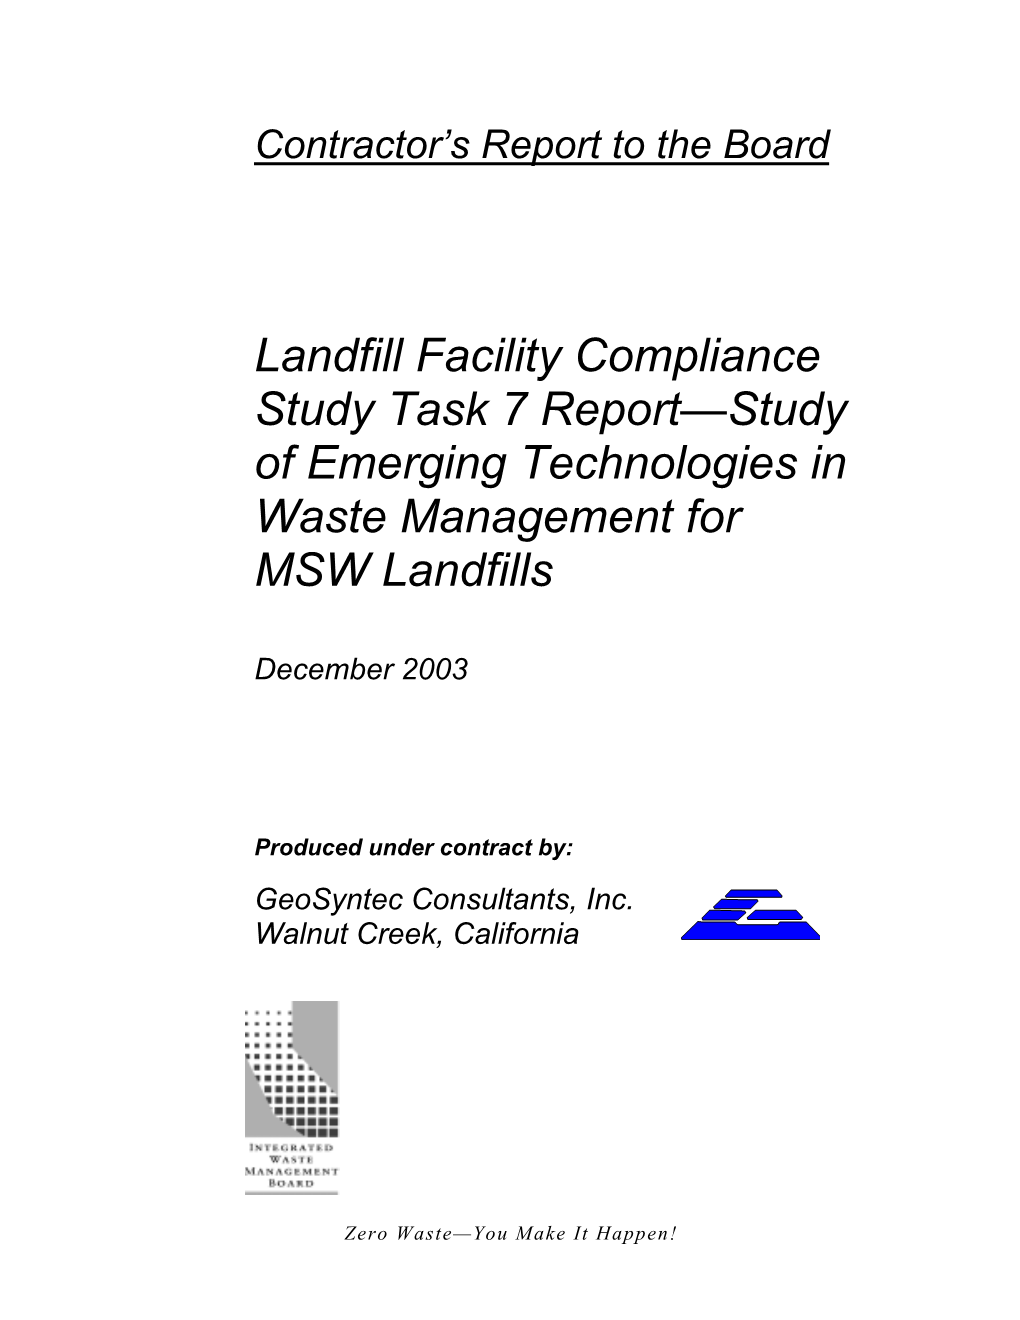 Study of Emerging Technologies in Waste Management for MSW Landfills